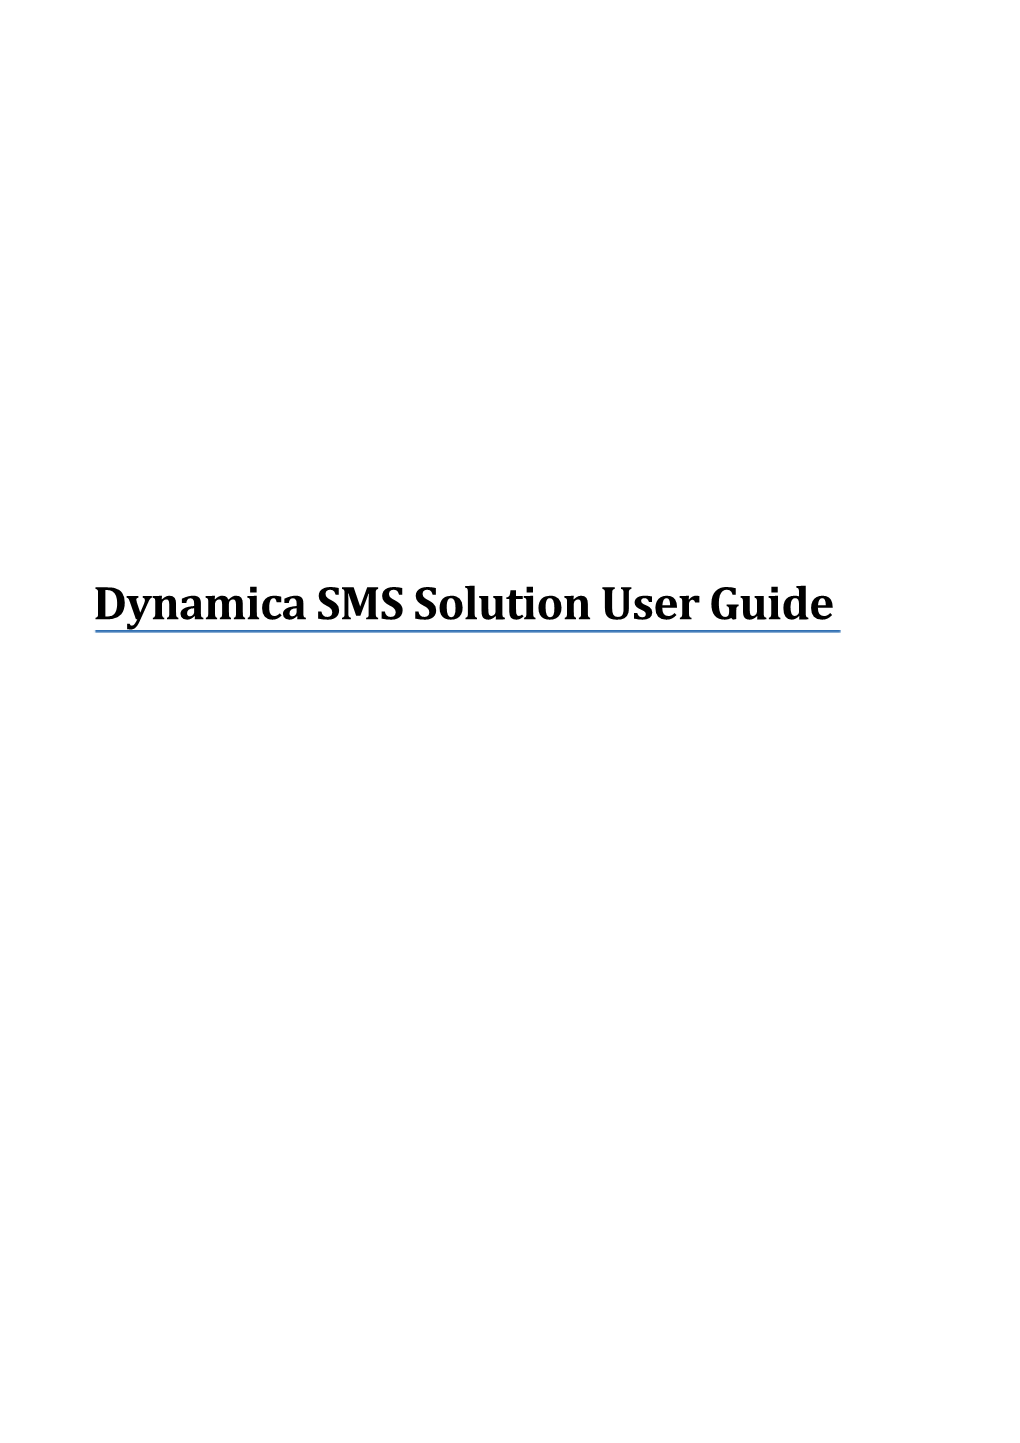 Dynamica SMS Solution User Guide